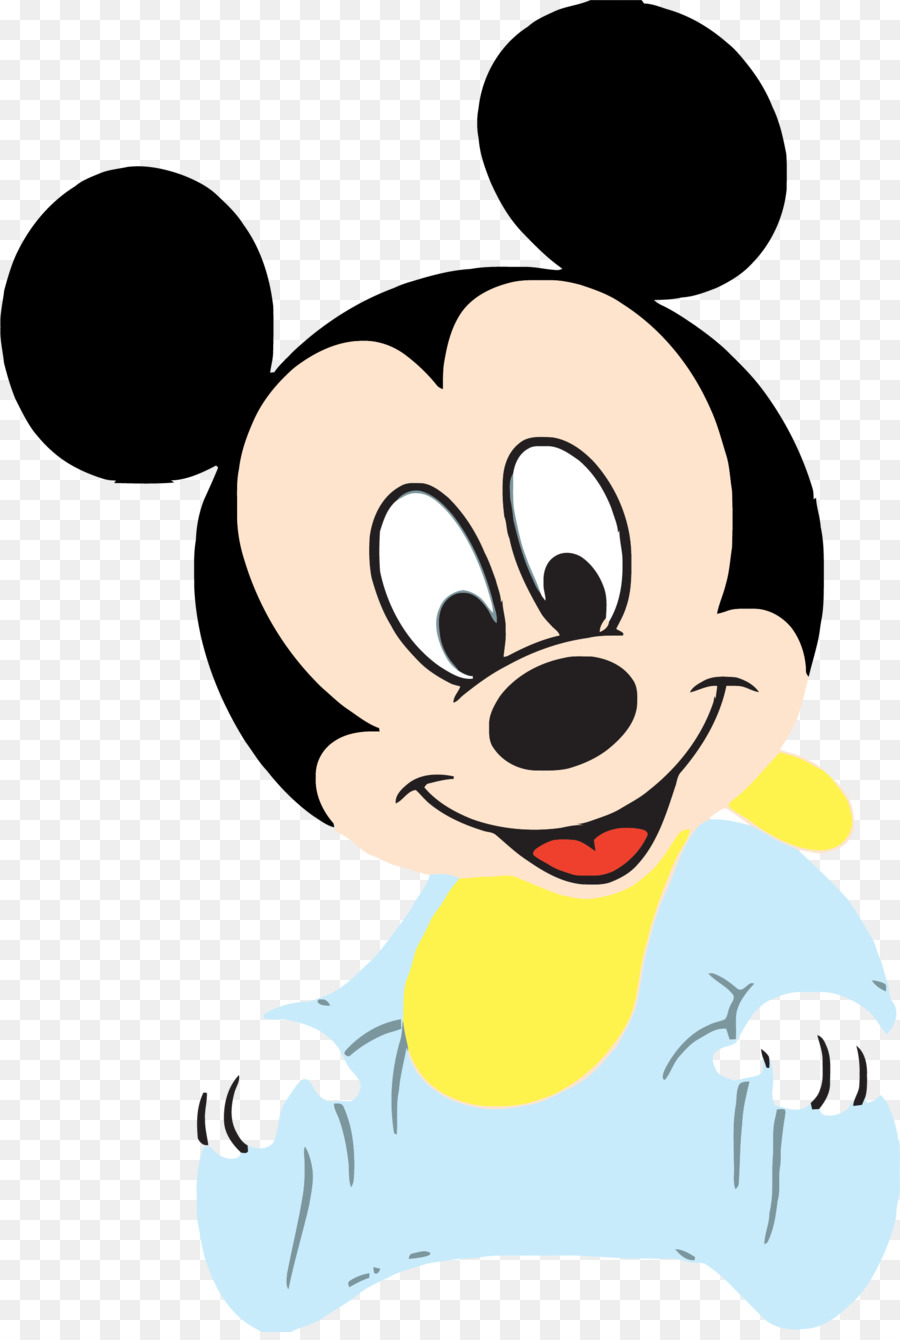 Mickey Mouse Minnie Mouse Khuy?n mãi Party Infant - mickey mouse png download - 1894*2804 - Free Transparent Mickey Mouse png Download.